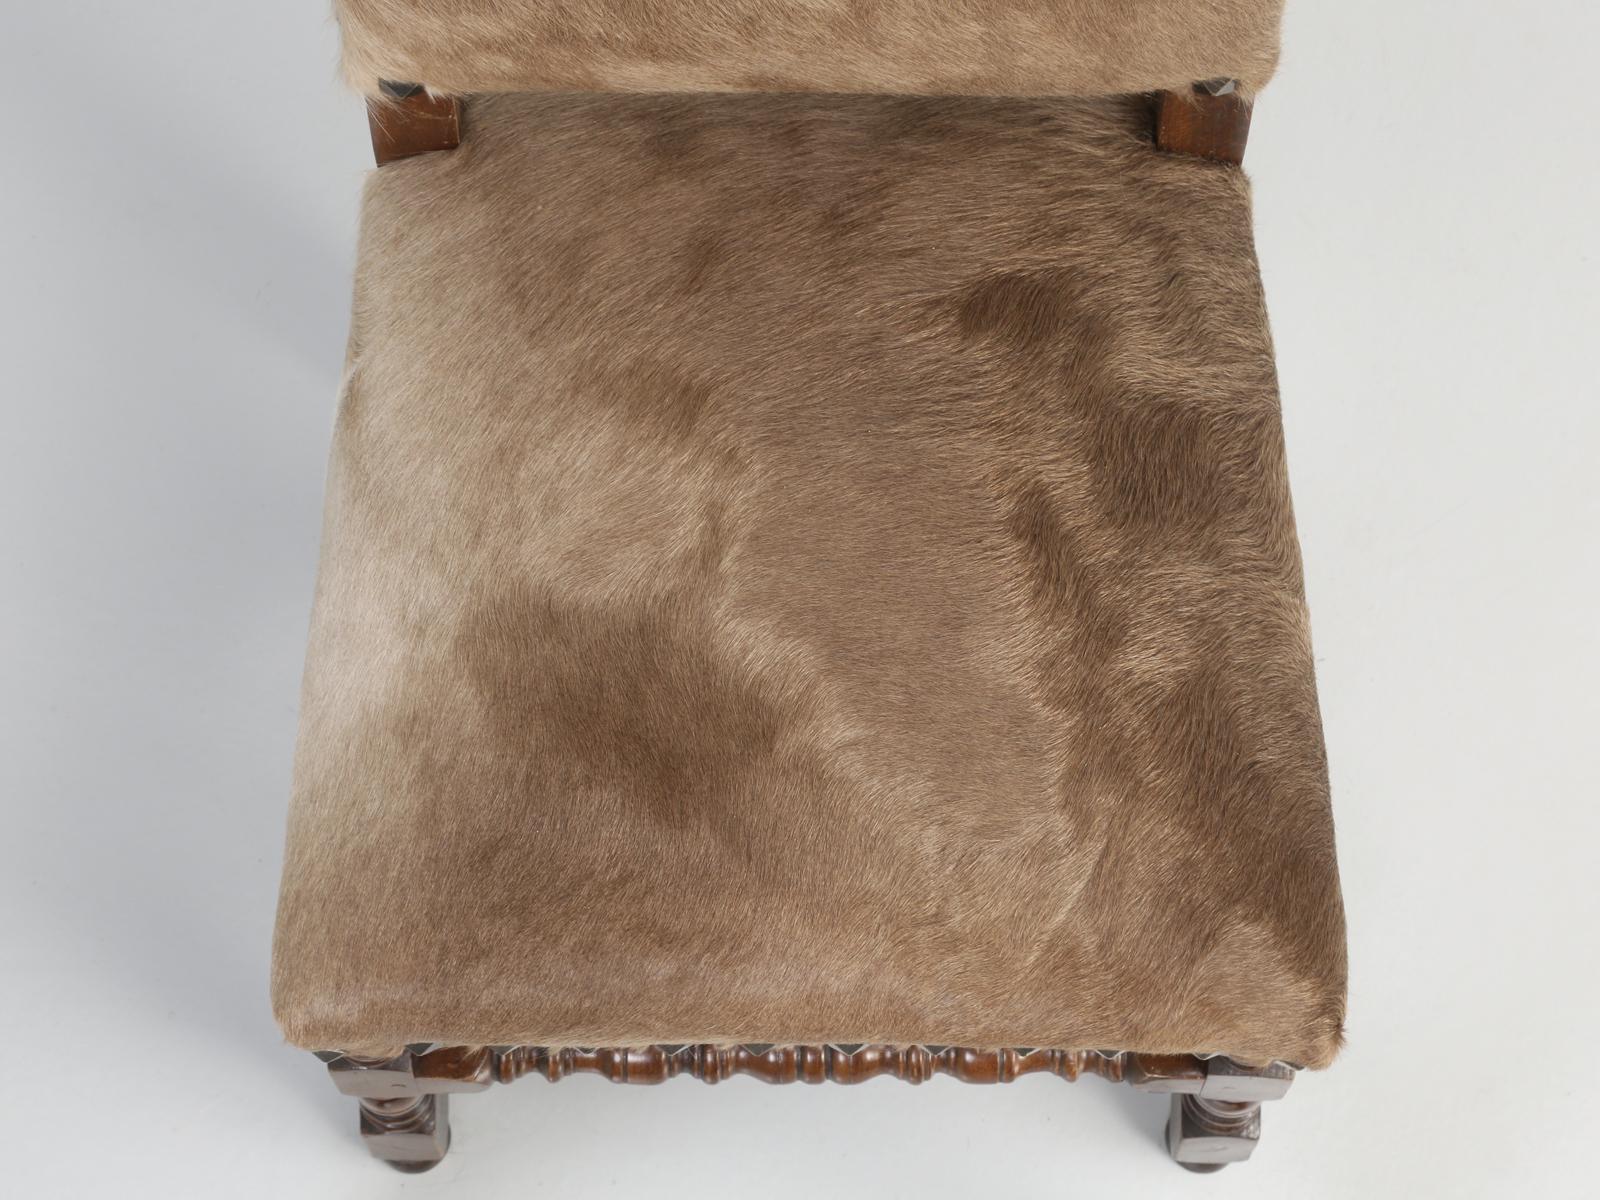 Early 20th Century Antique French Louis XIII Style Side Chair Covered in Cow Fur on Hide